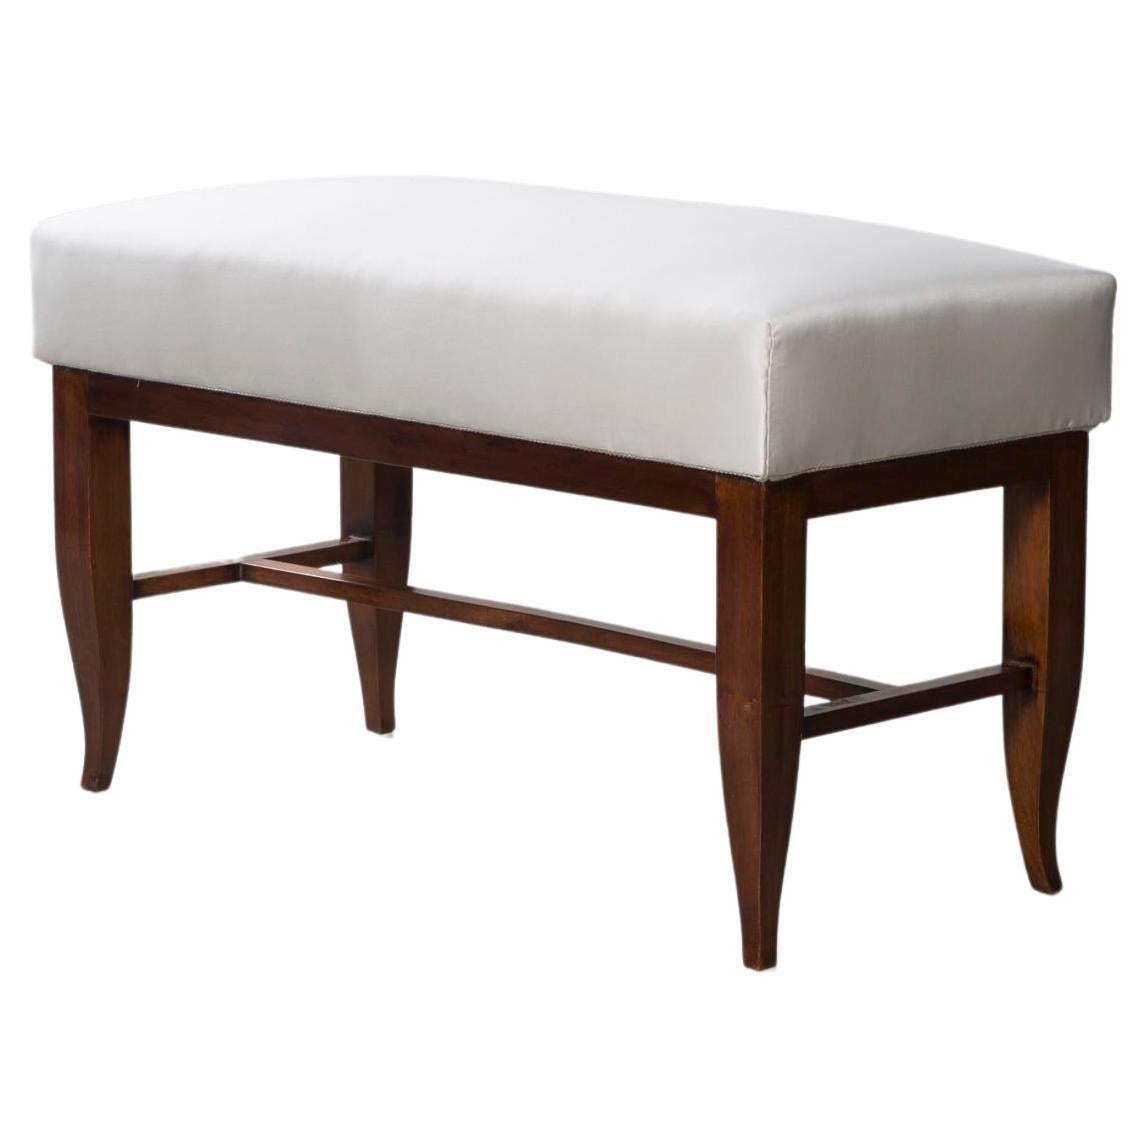 Benche by Gio Ponti